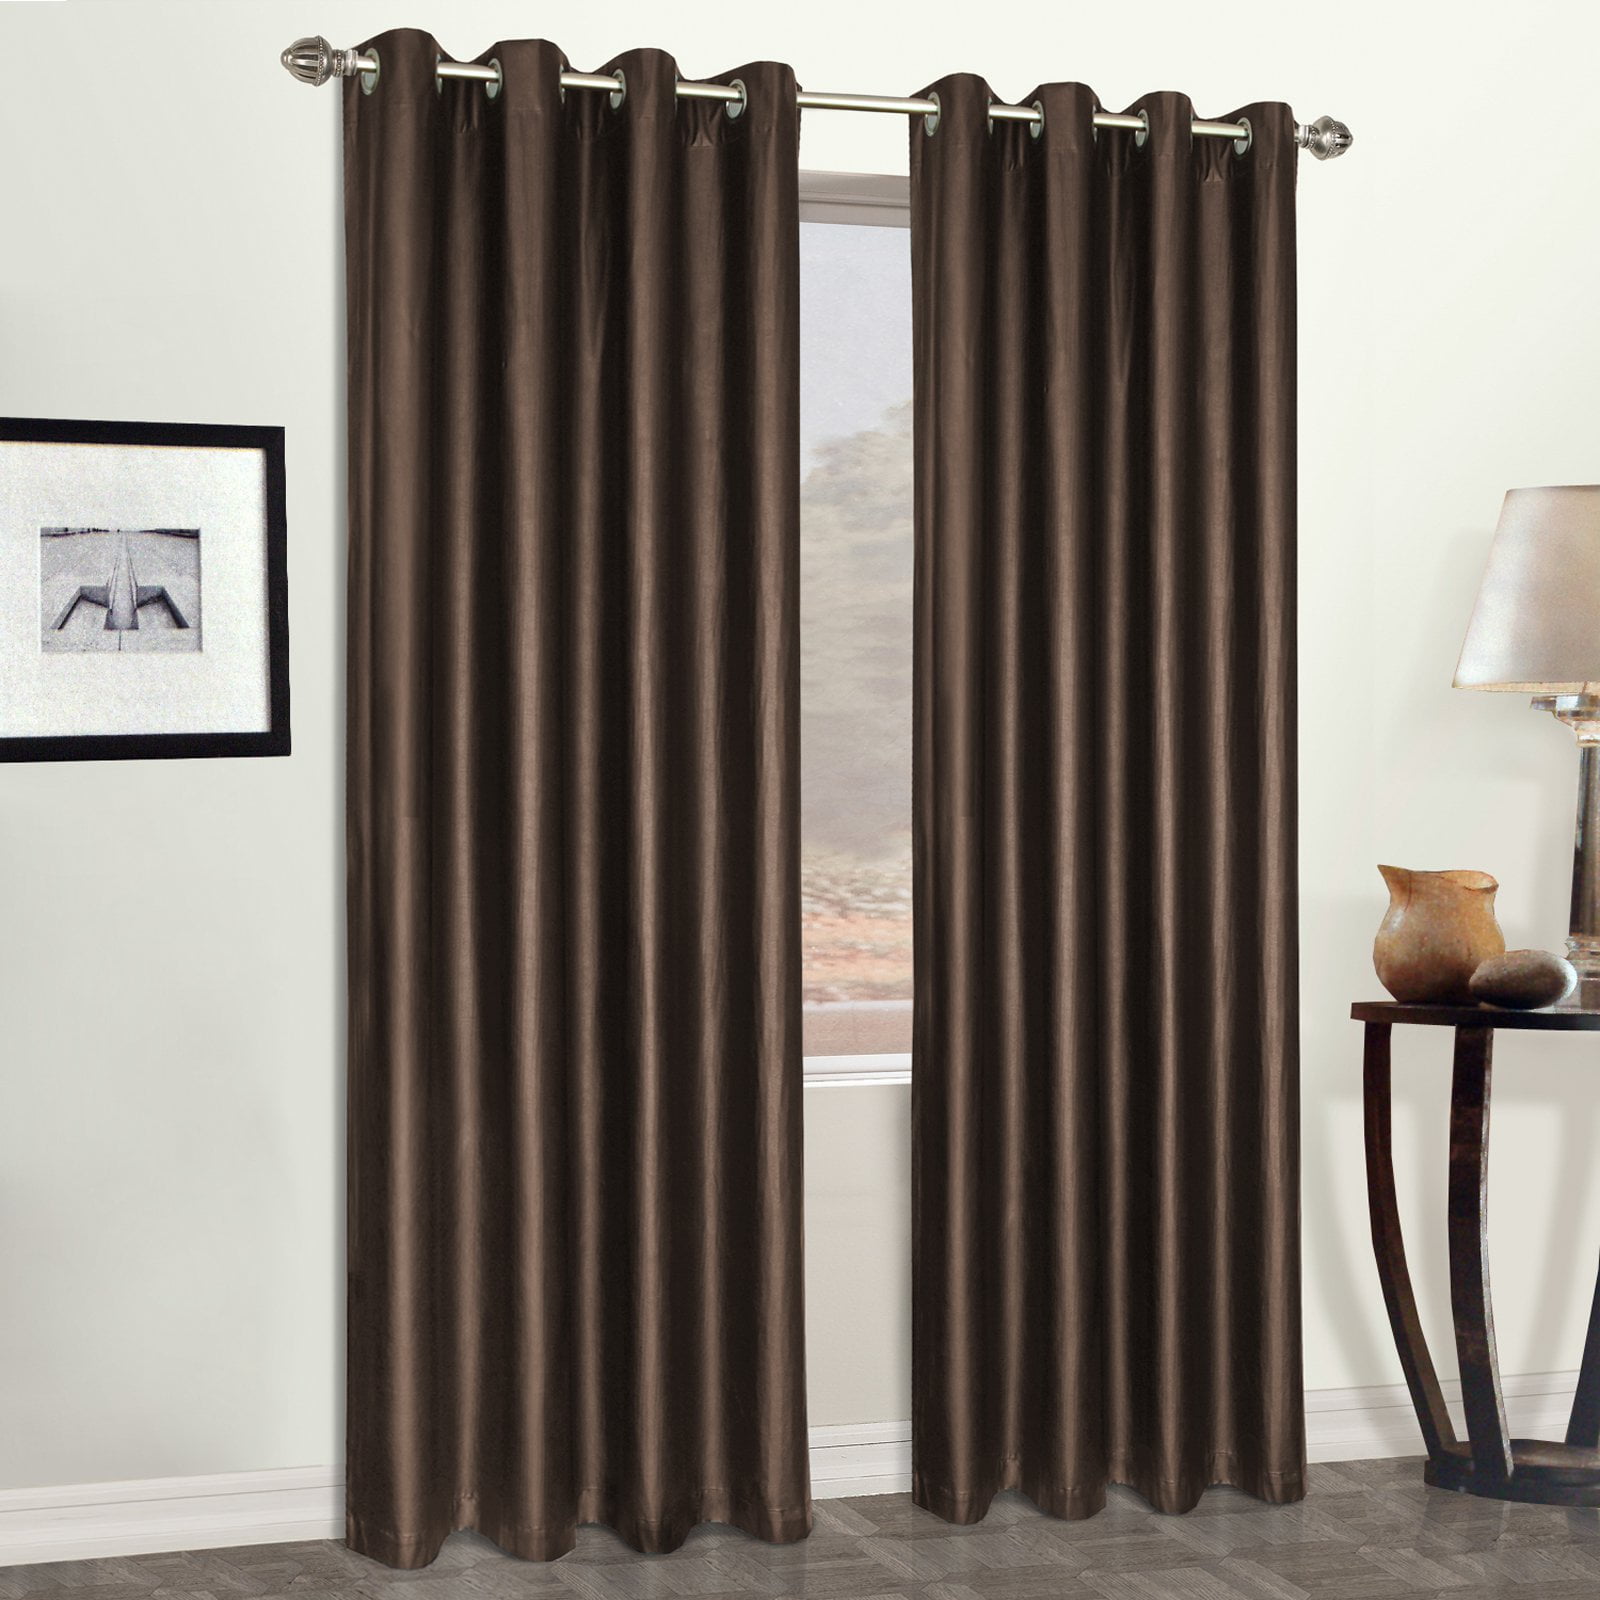 Faux Leather 52 X 95 Window Curtain, Black Faux Leather Curtain Brown